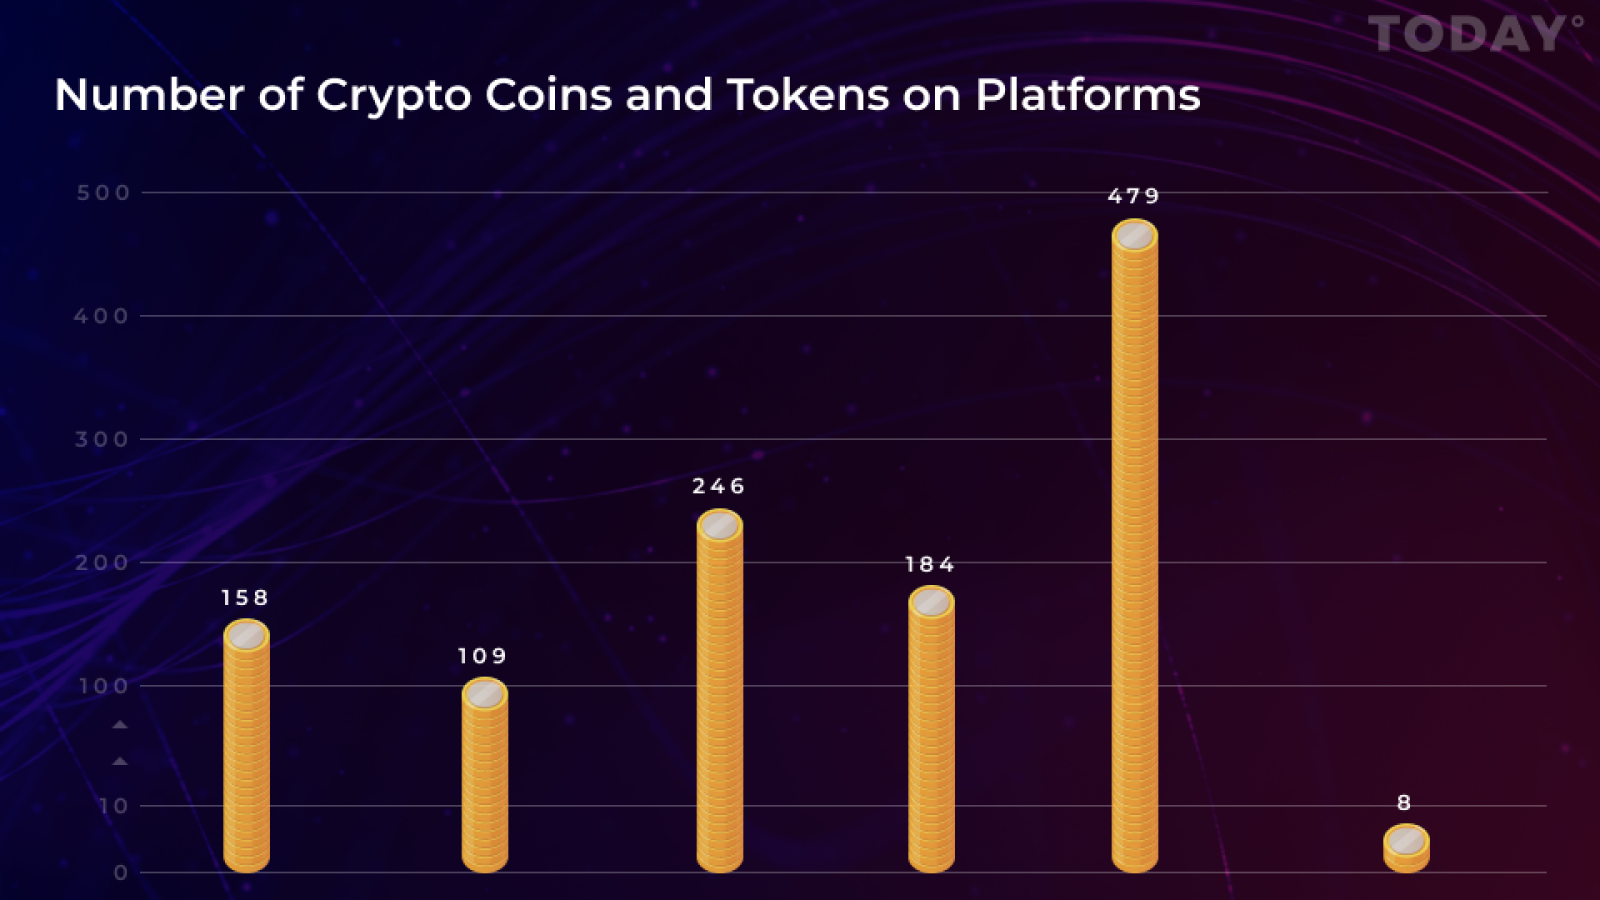 Number of Crypto Coins and Tokens on Platforms